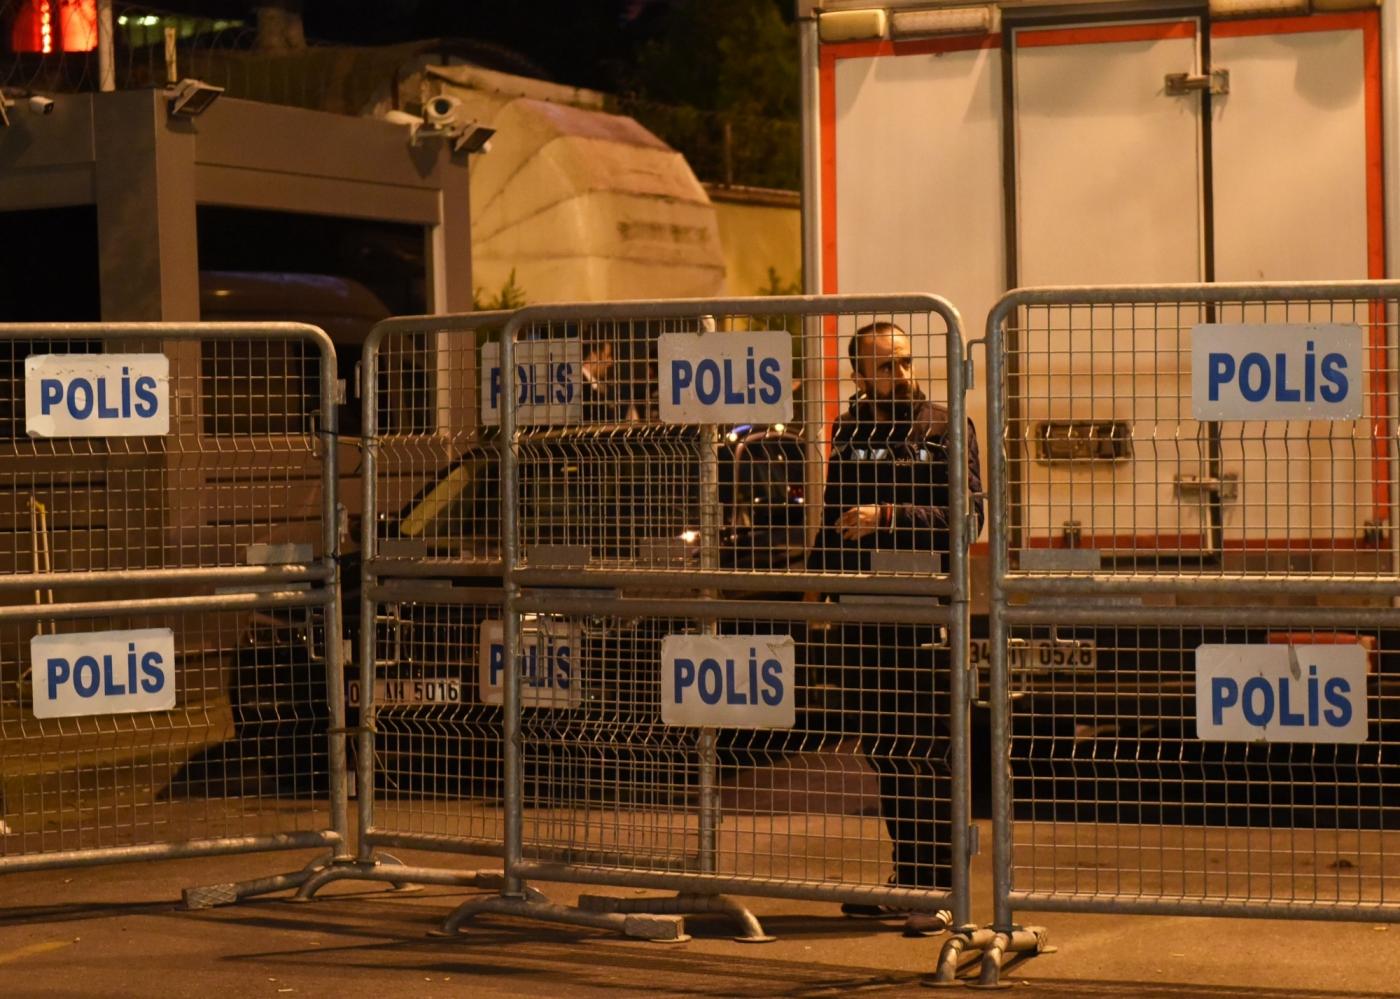 ISTANBUL, Oct. 15, 2018 (Xinhua) -- A Turkish policeman stands outside the Saudi consulate in Istanbul, Turkey, Oct. 15, 2018. A Turkish team entered the Saudi consulate in Istanbul on Monday evening to conduct a search over the disappearance of the Saudi journalist Jamal Khashoggi, live broadcast showed. (Xinhua/He Canling/IANS) by .